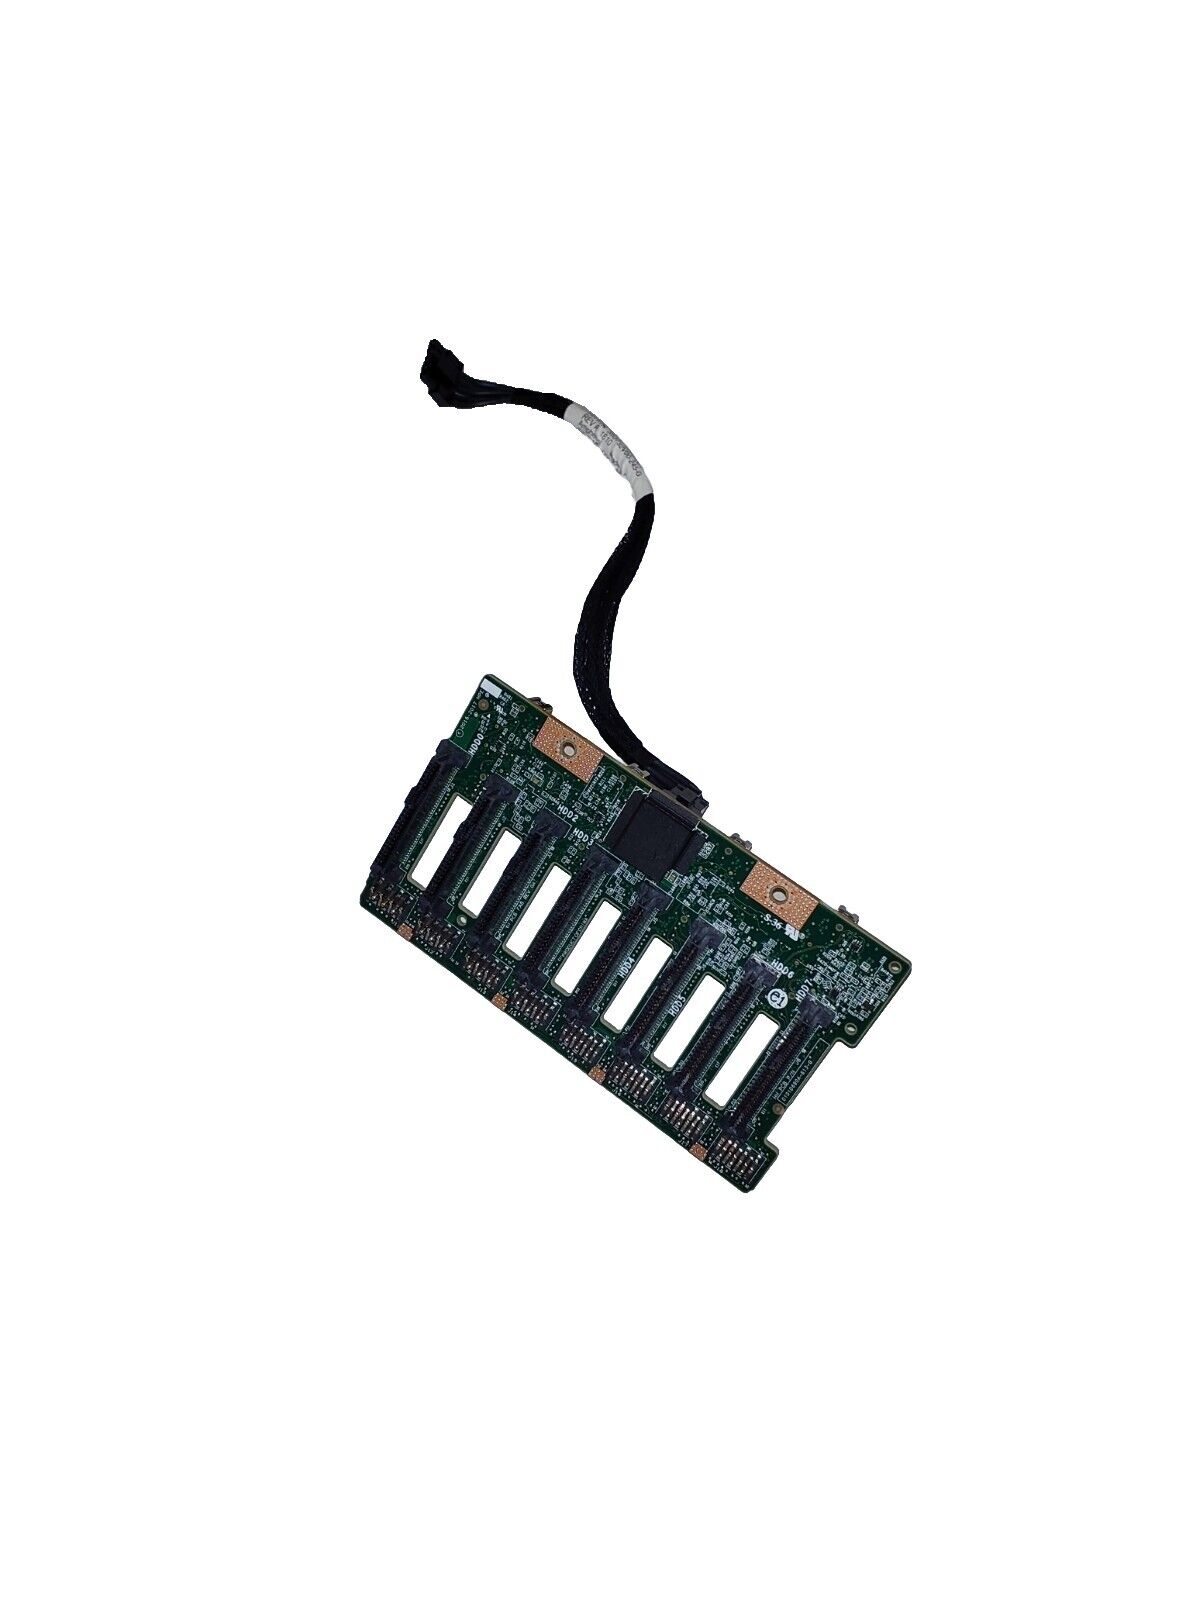 HP NVME Backplane for HPE Proliant DL380 G10 8SFF 872971-001 826572-001 W/ Cable